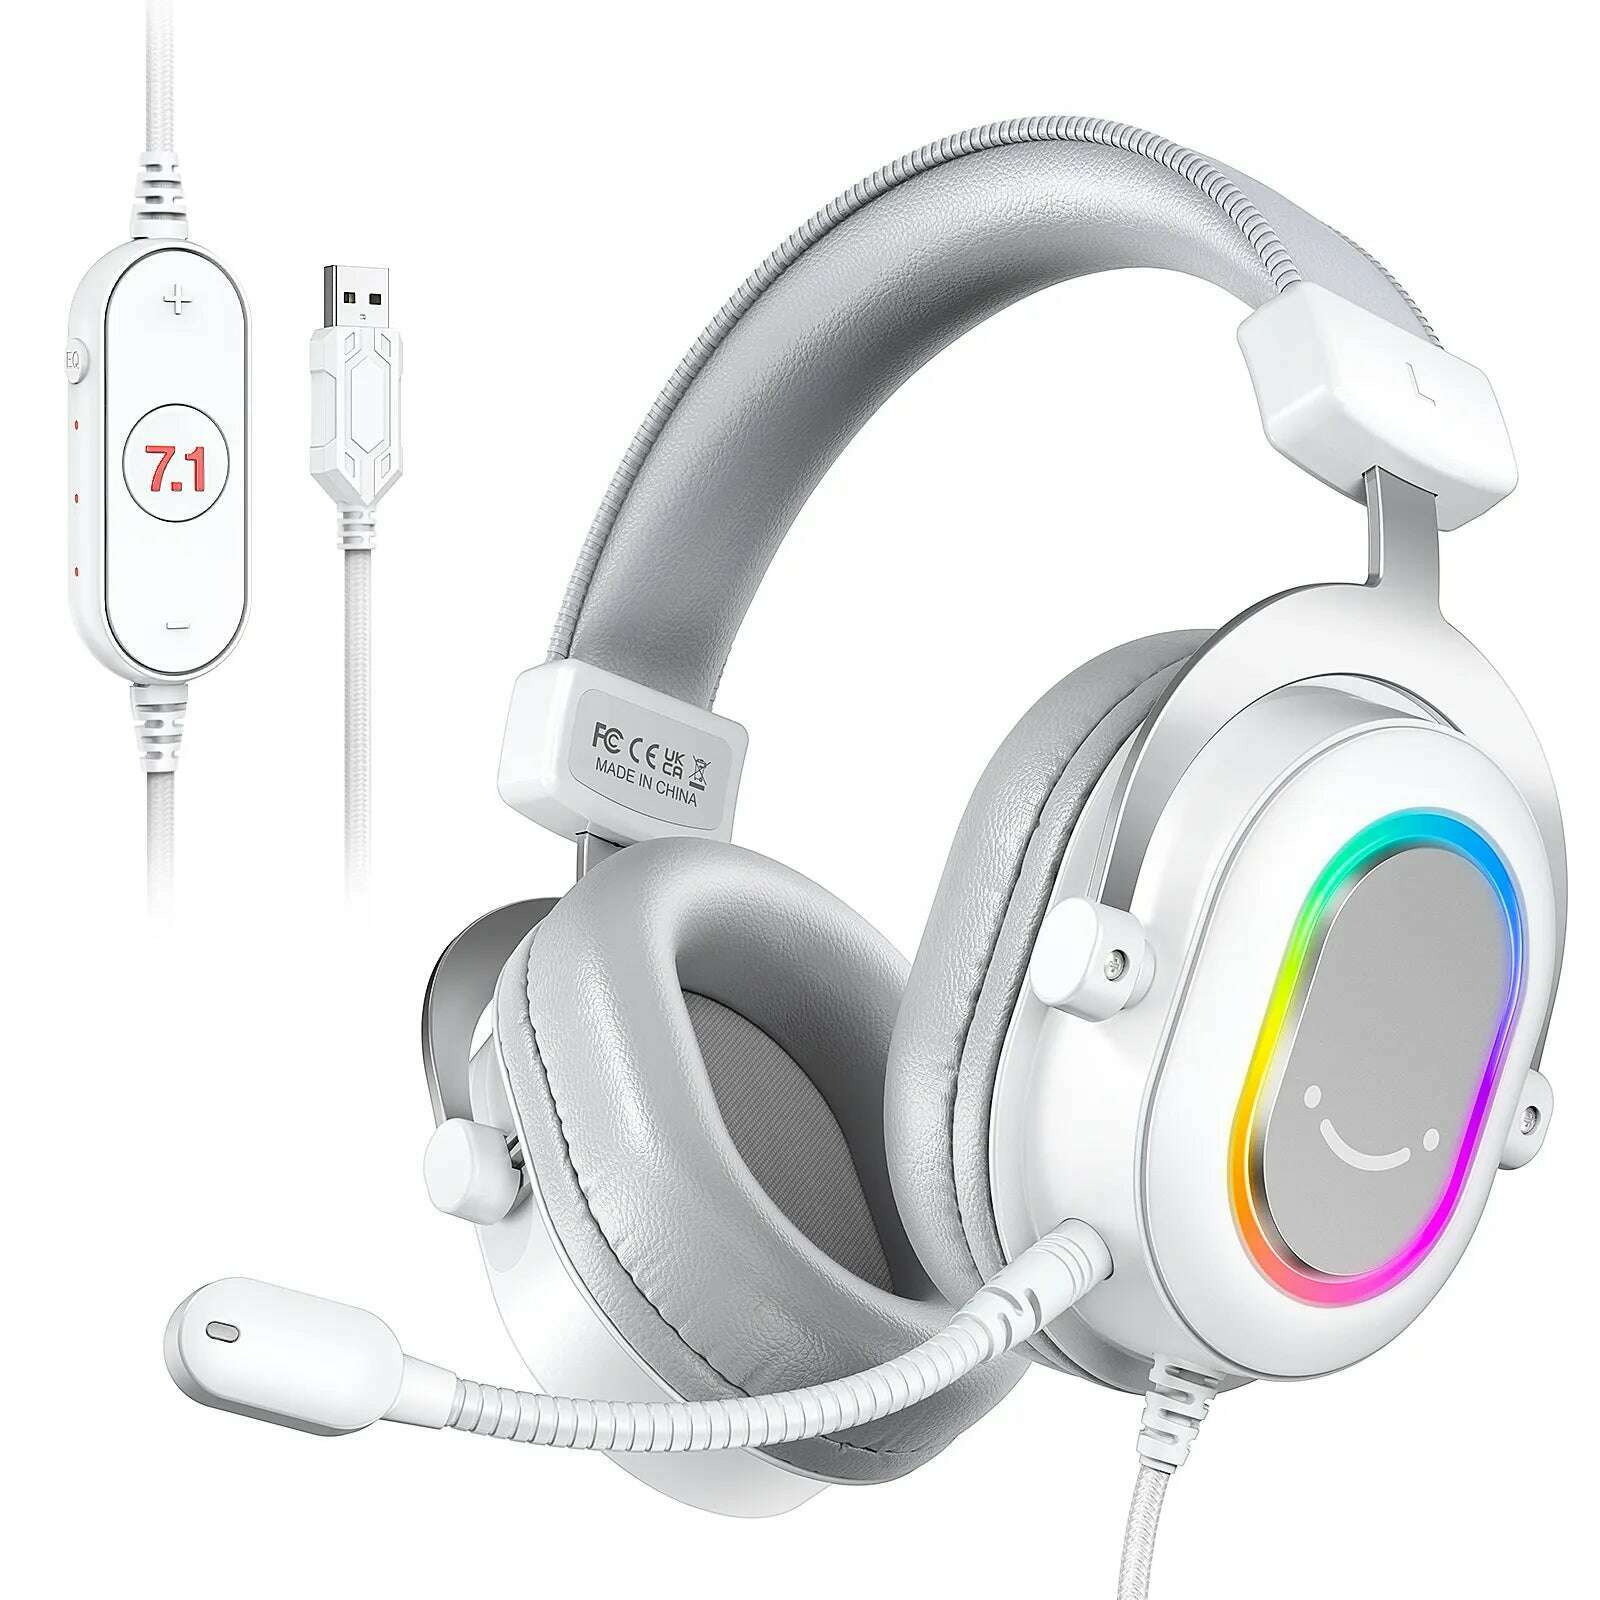 KIMLUD, FIFINE RGB Gaming Headset with 7.1 Surround Sound/3-EQ/MIC,Over-ear Headphone with In-line Control for PC PS4 PS5 Ampligame-H6W, WHITE, KIMLUD Womens Clothes